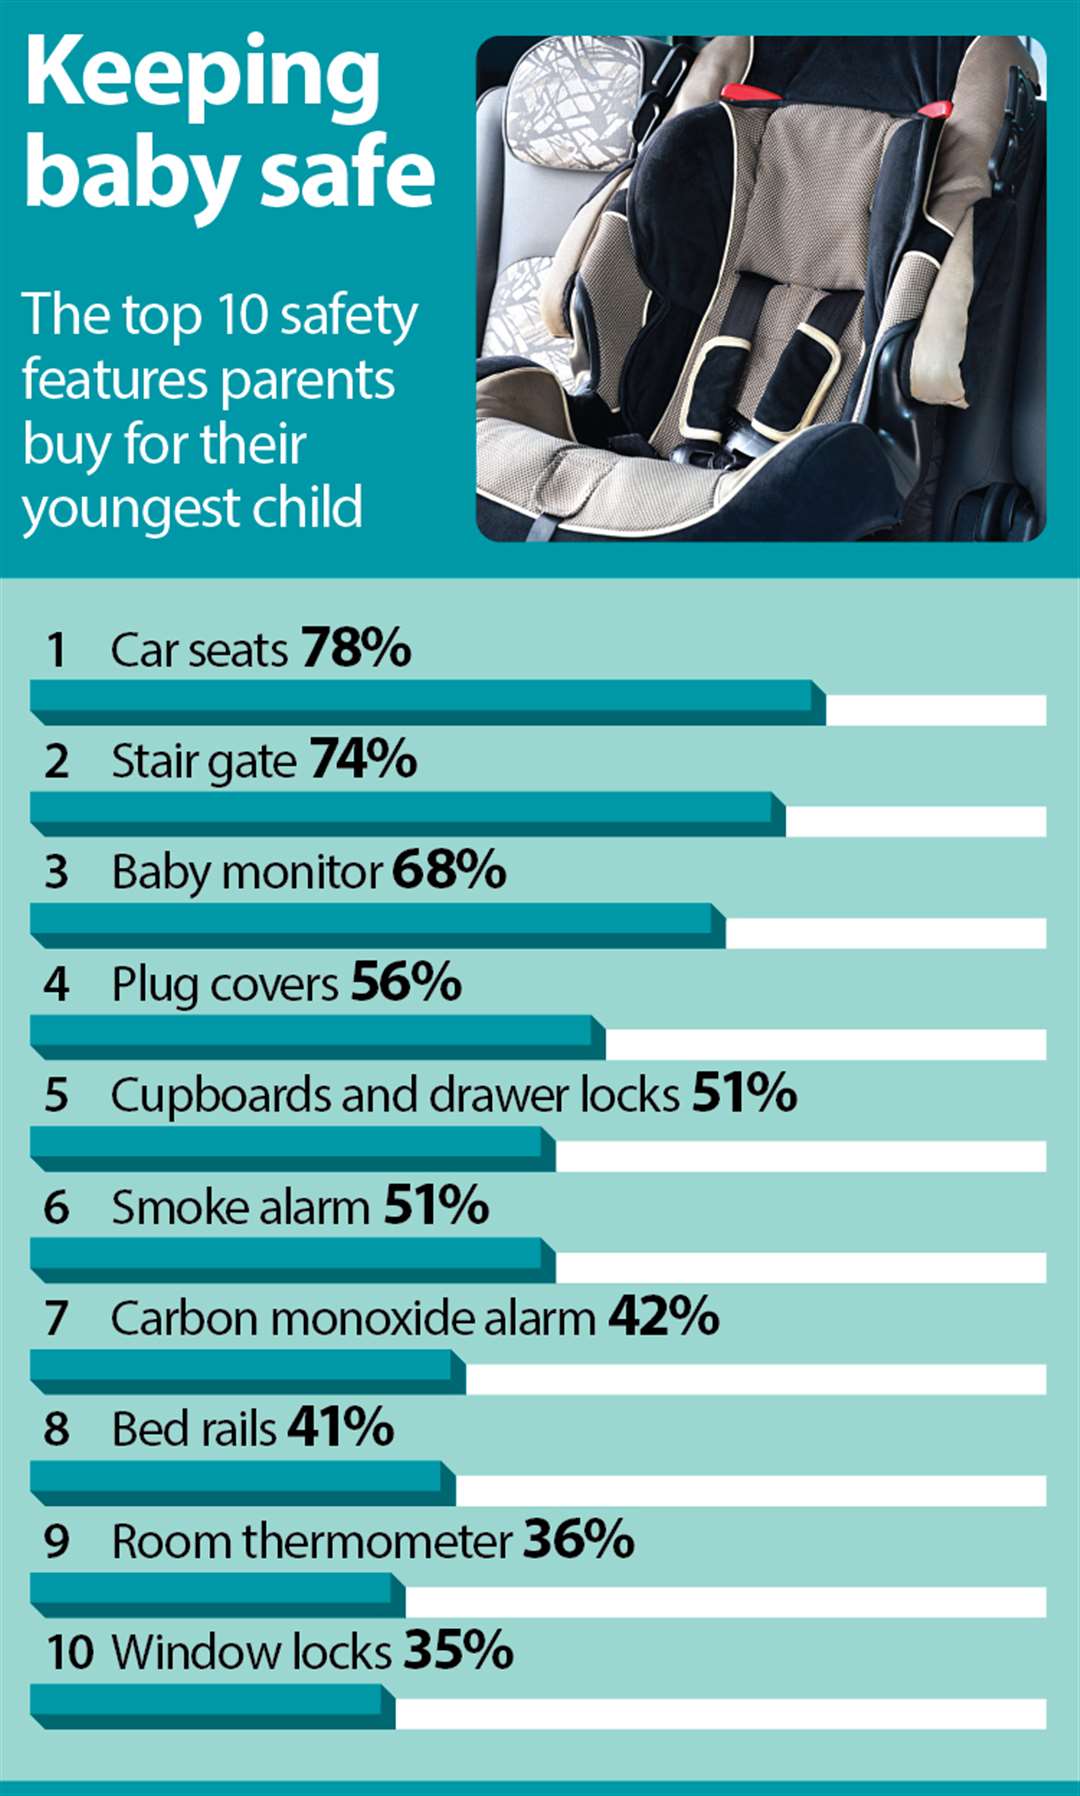 Car seats are the most purchased safety item